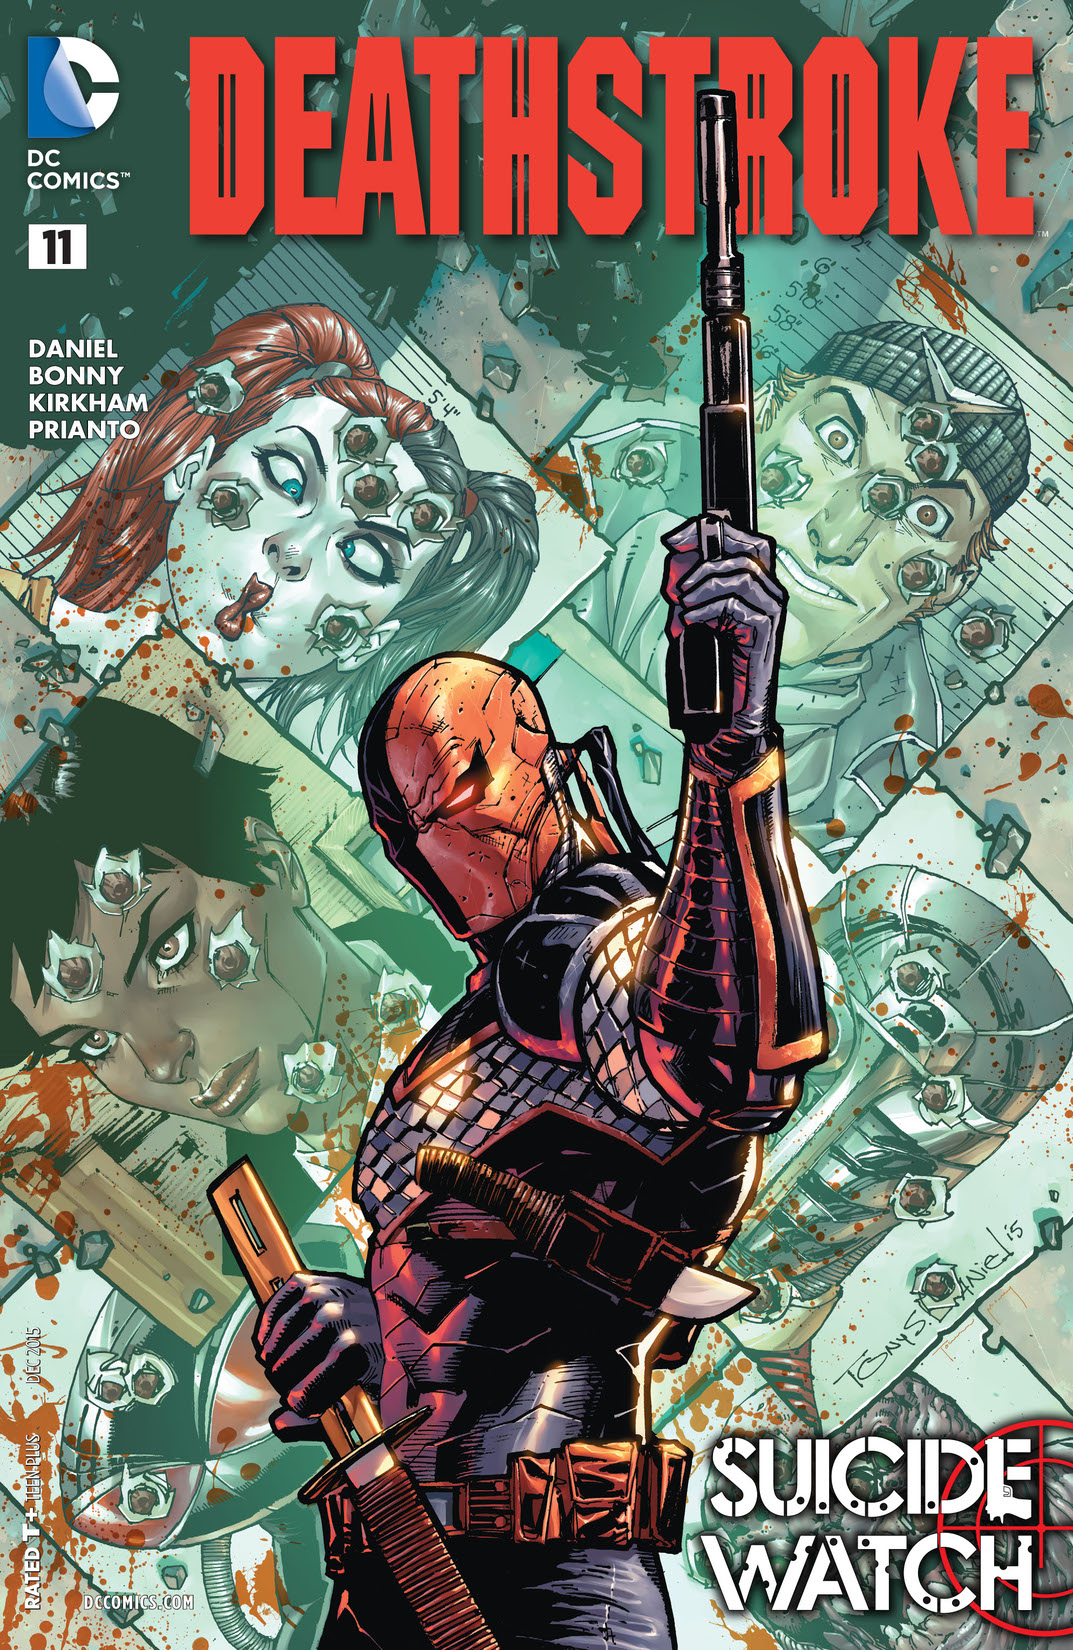 Deathstroke (2014-) #11 preview images